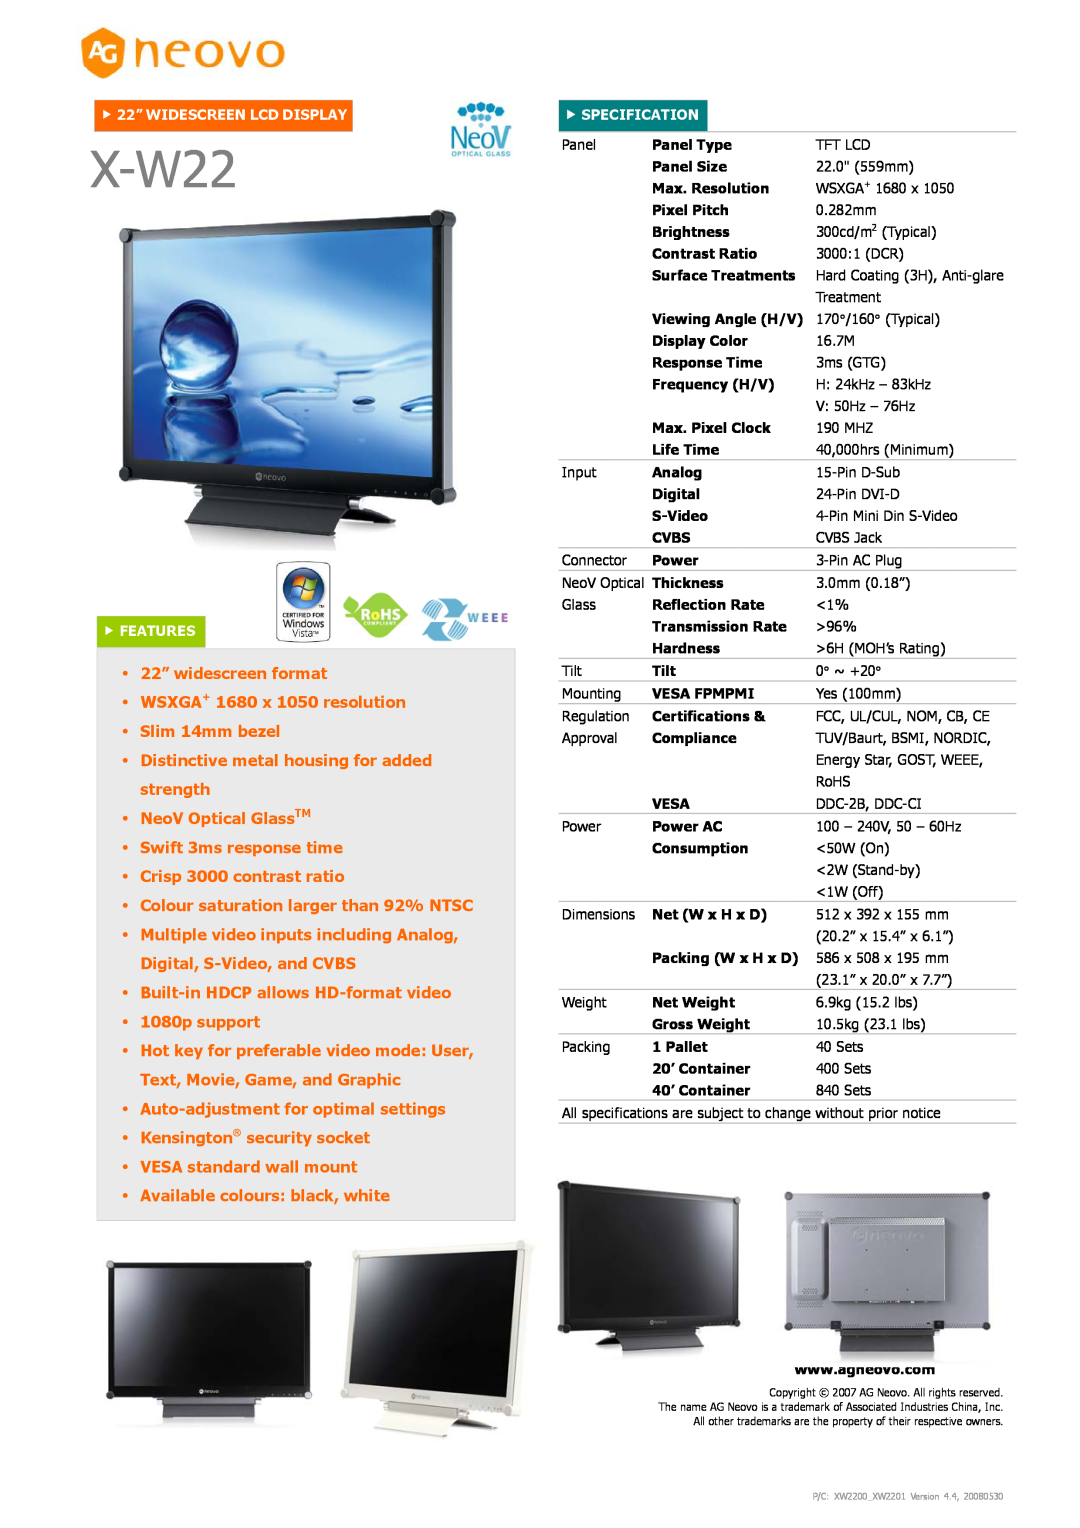 AG Neovo X-W22 dimensions 22” widescreen format WSXGA+ 1680 x 1050 resolution Slim 14mm bezel, f FEATURES, f SPECIFICATION 